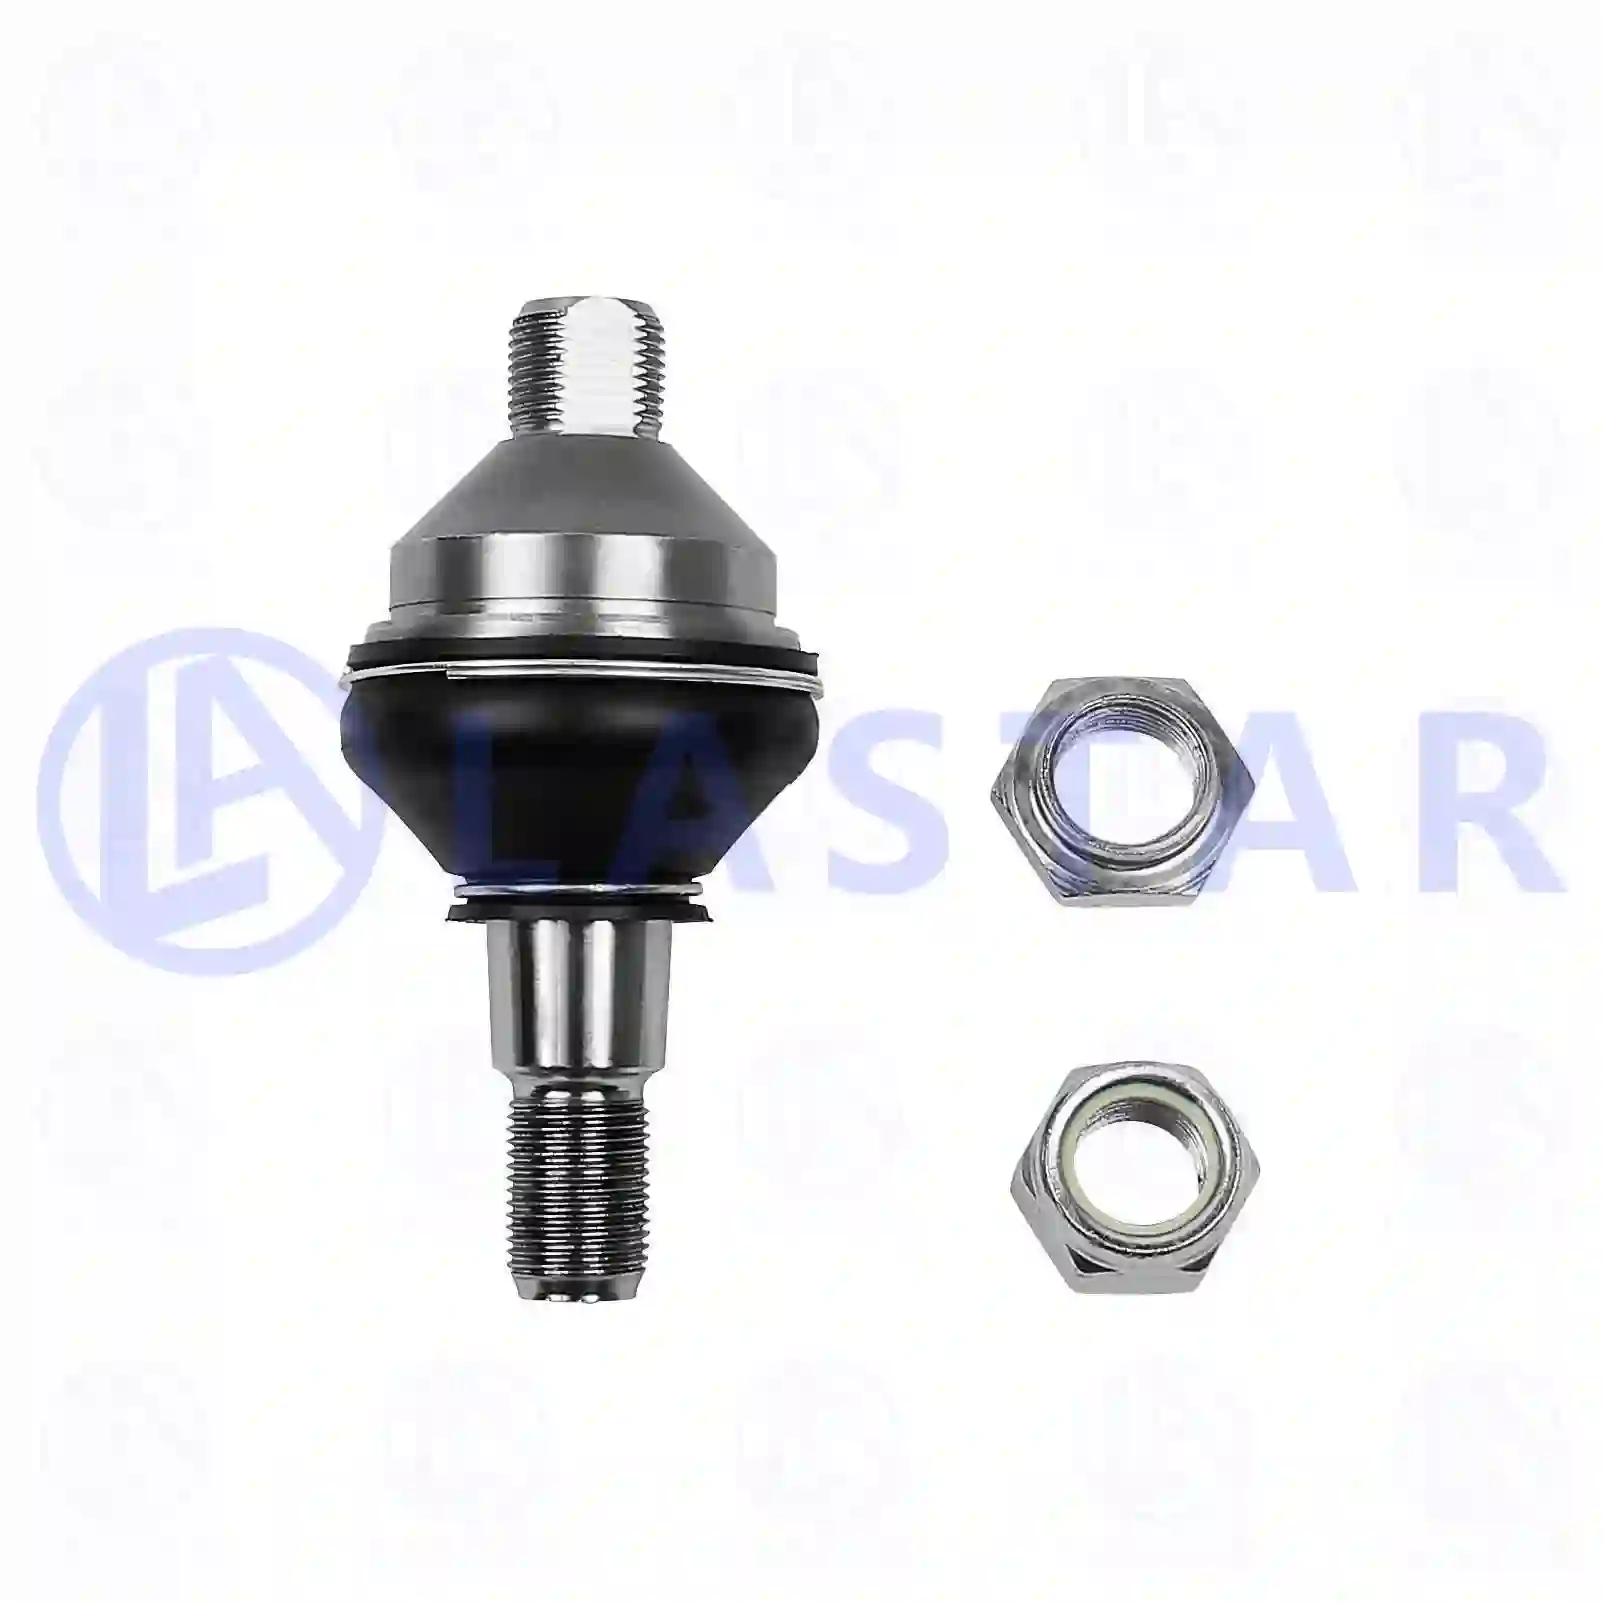 Ball joint, right hand thread, 77731268, 360828, 93802242, 93804061, 93807320, 93807542, 93807545, 03302242, 93802242, 93807320, 93807545, 360828, ZG40410-0008 ||  77731268 Lastar Spare Part | Truck Spare Parts, Auotomotive Spare Parts Ball joint, right hand thread, 77731268, 360828, 93802242, 93804061, 93807320, 93807542, 93807545, 03302242, 93802242, 93807320, 93807545, 360828, ZG40410-0008 ||  77731268 Lastar Spare Part | Truck Spare Parts, Auotomotive Spare Parts